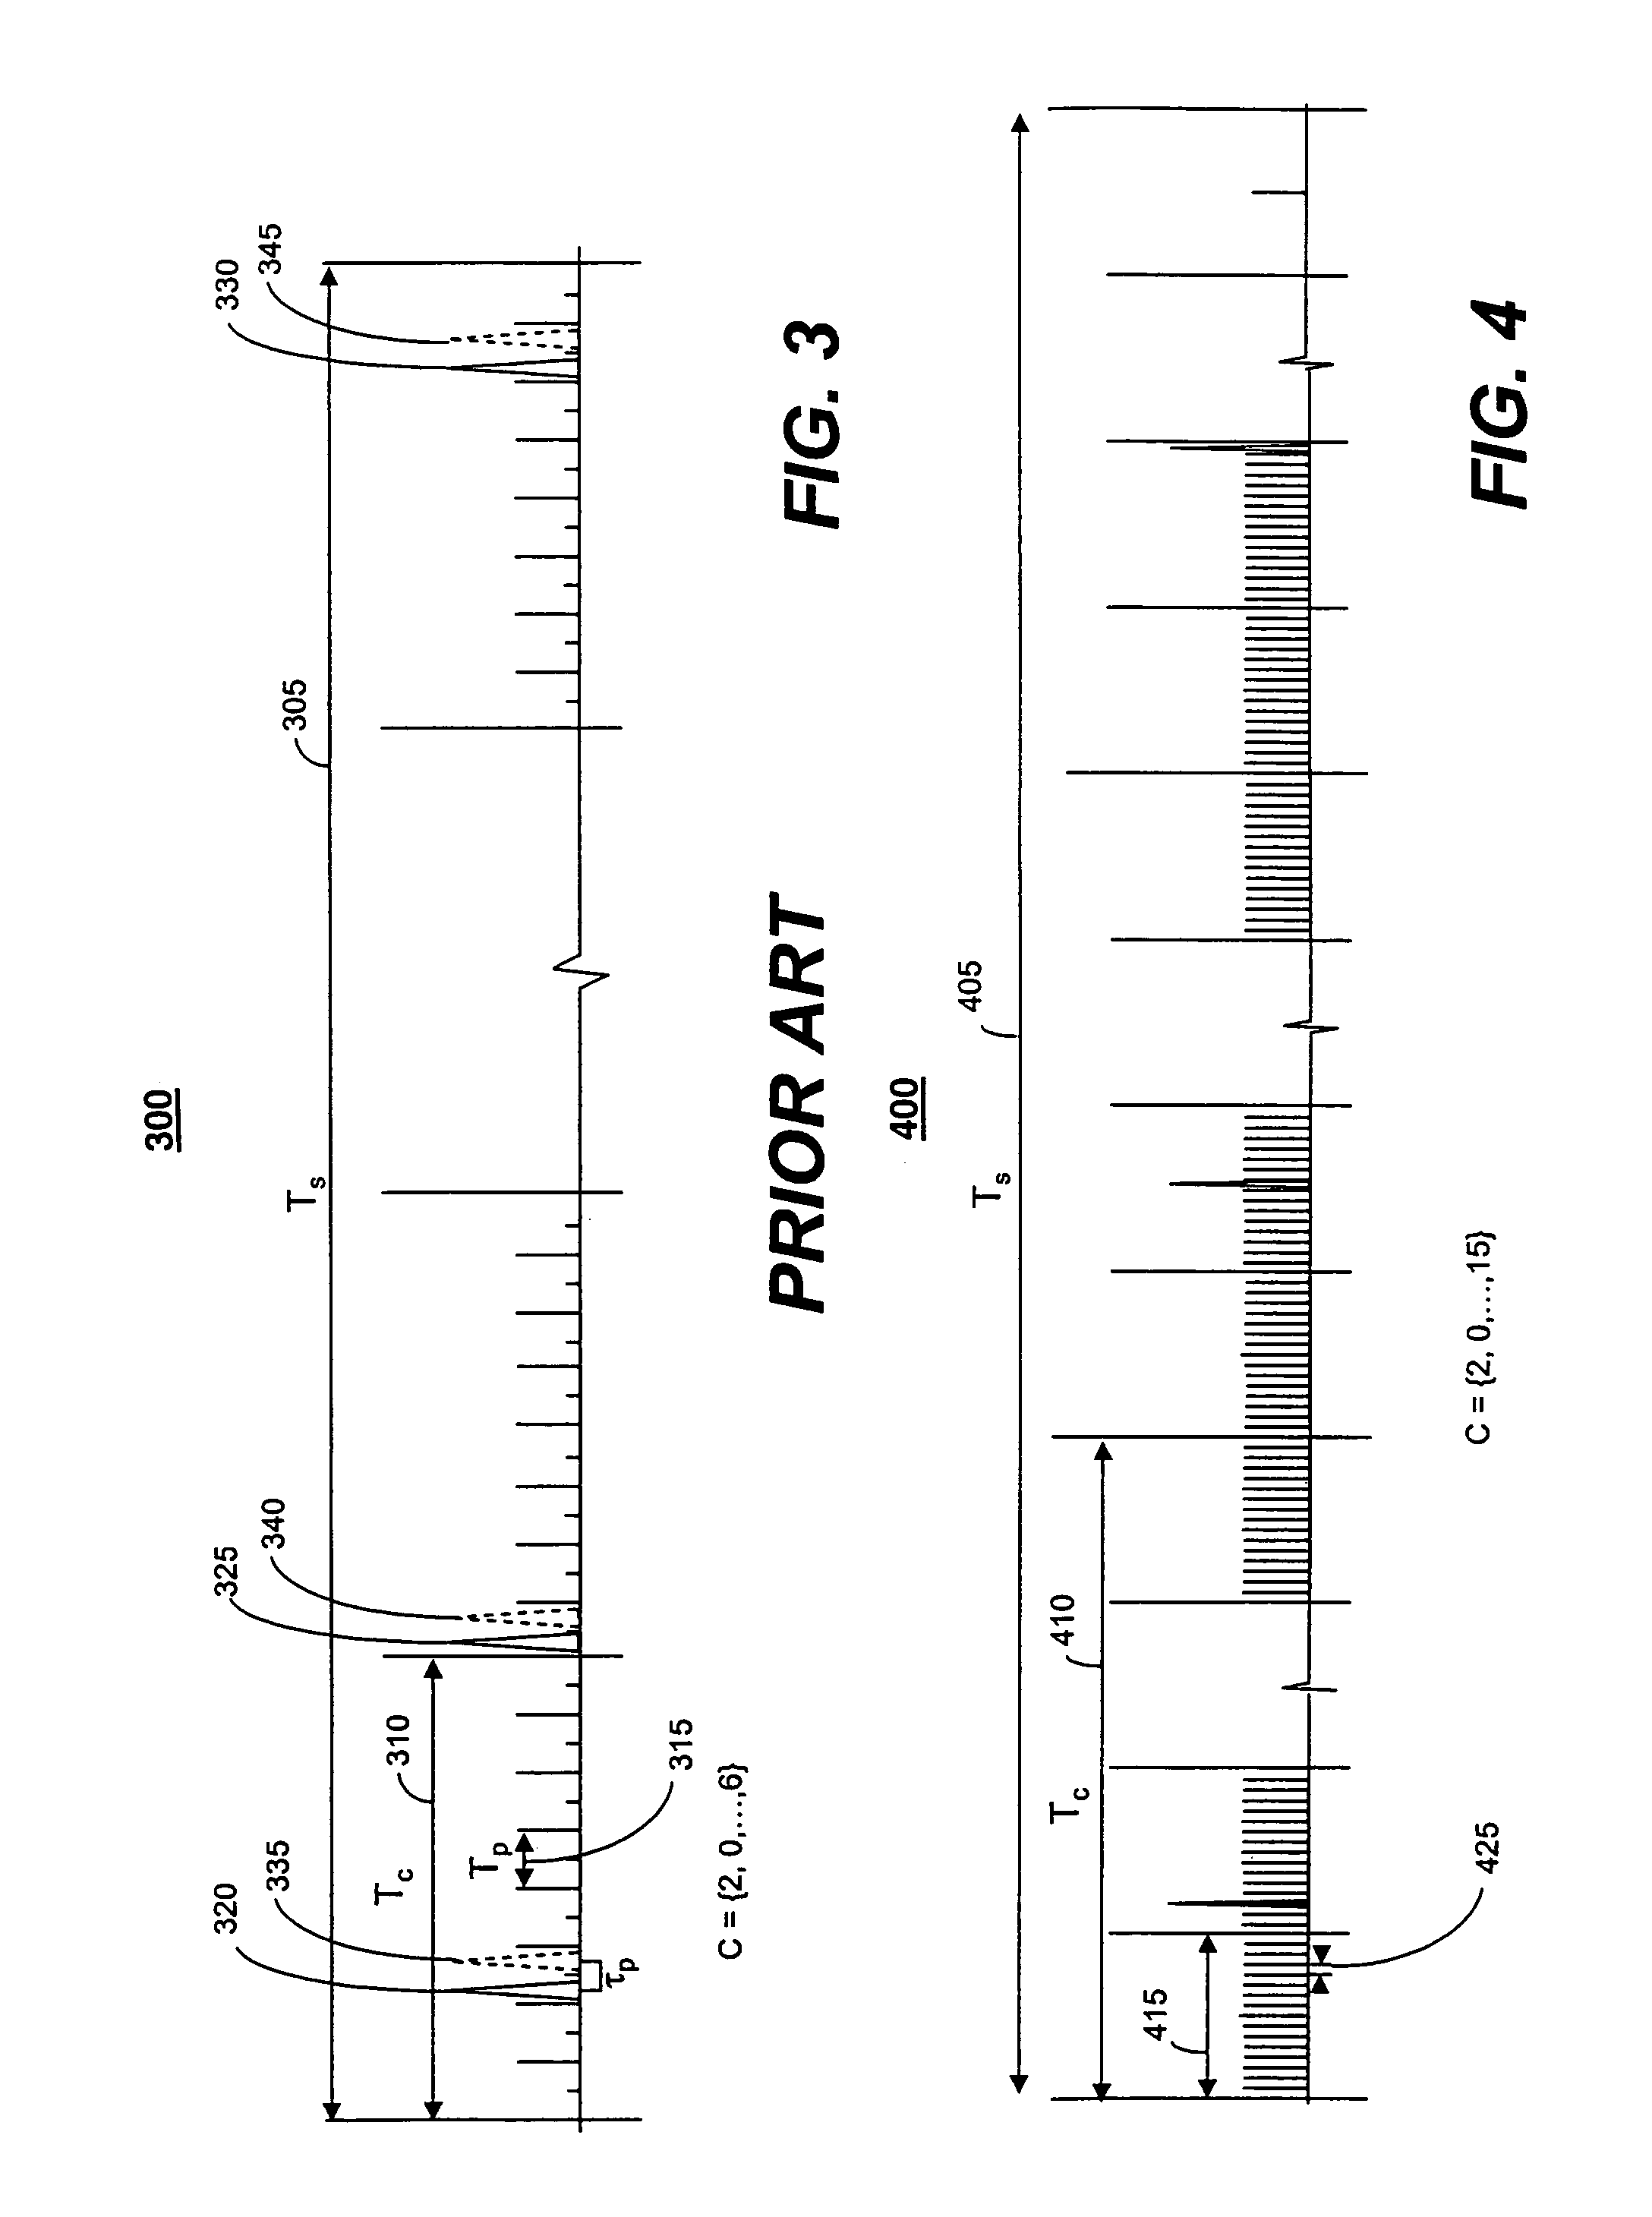 Variable spacing pulse position modulation for ultra-wideband communication links